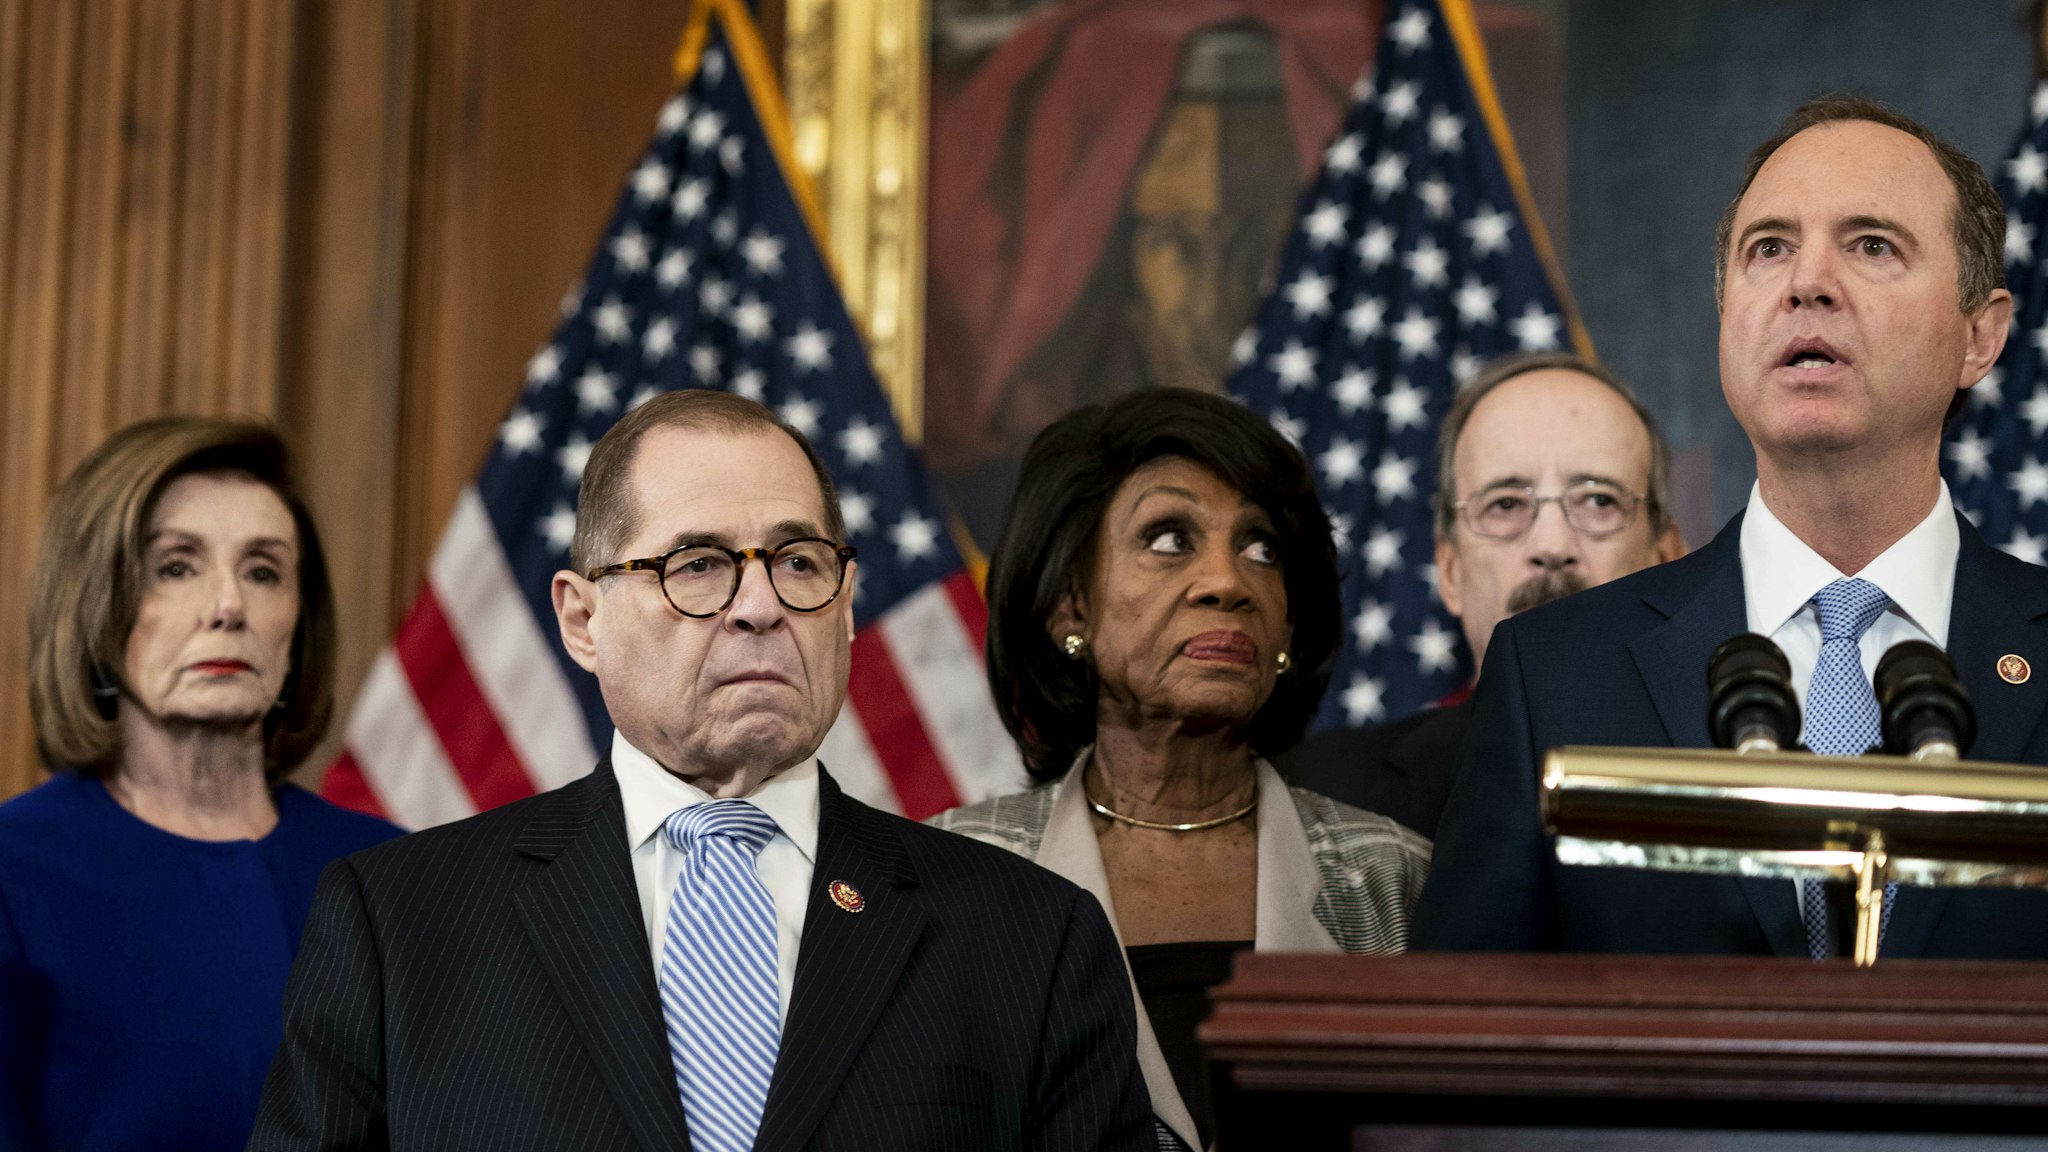 DECEMBER 10, 2019: Speaker of the House Nancy Pelosi, Judiciary Committee Chairman Jerrold Nadler, House Intelligence Chairman Adam Schiff, along with Chairman Elliot Engel, Chairwoman Maxine Waters, Chairwoman Carolyn Maloney, and Chairman Richard Neal gather to speak to journalists to announce the specific articles of impeachment during a press conference on Capitol Hill in Washington, DC on Tuesday December 10, 2019.